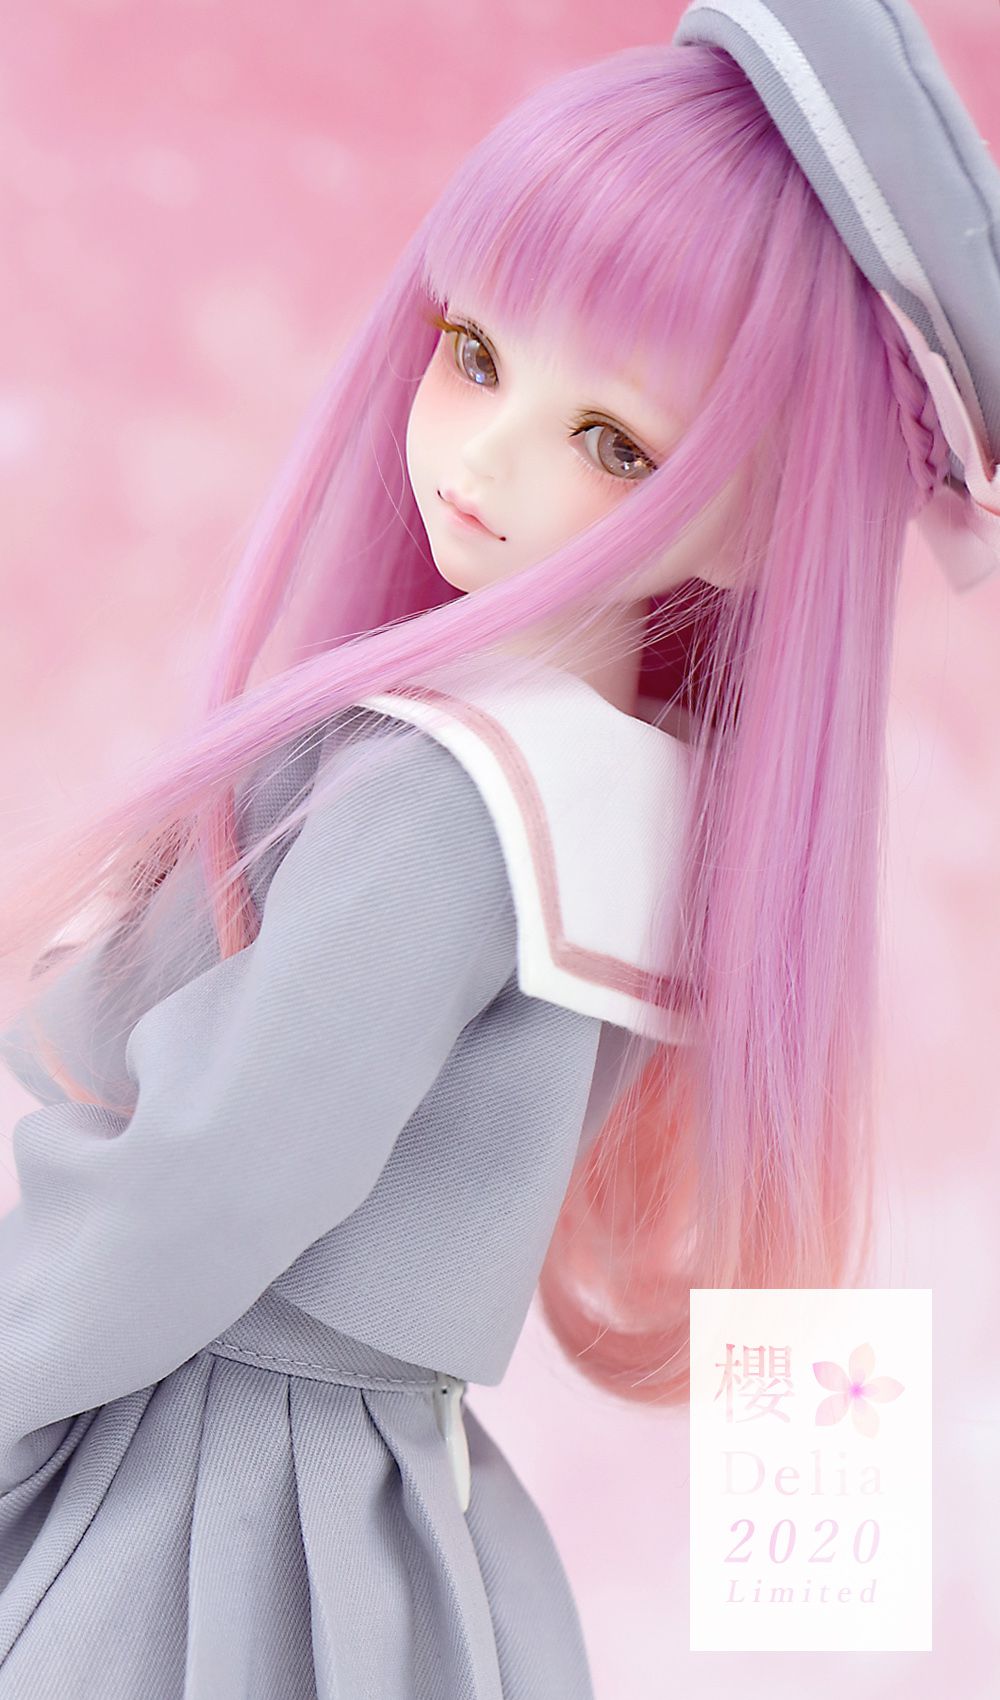 【Image】Wai, I'm going to buy a luxury figure....... 8